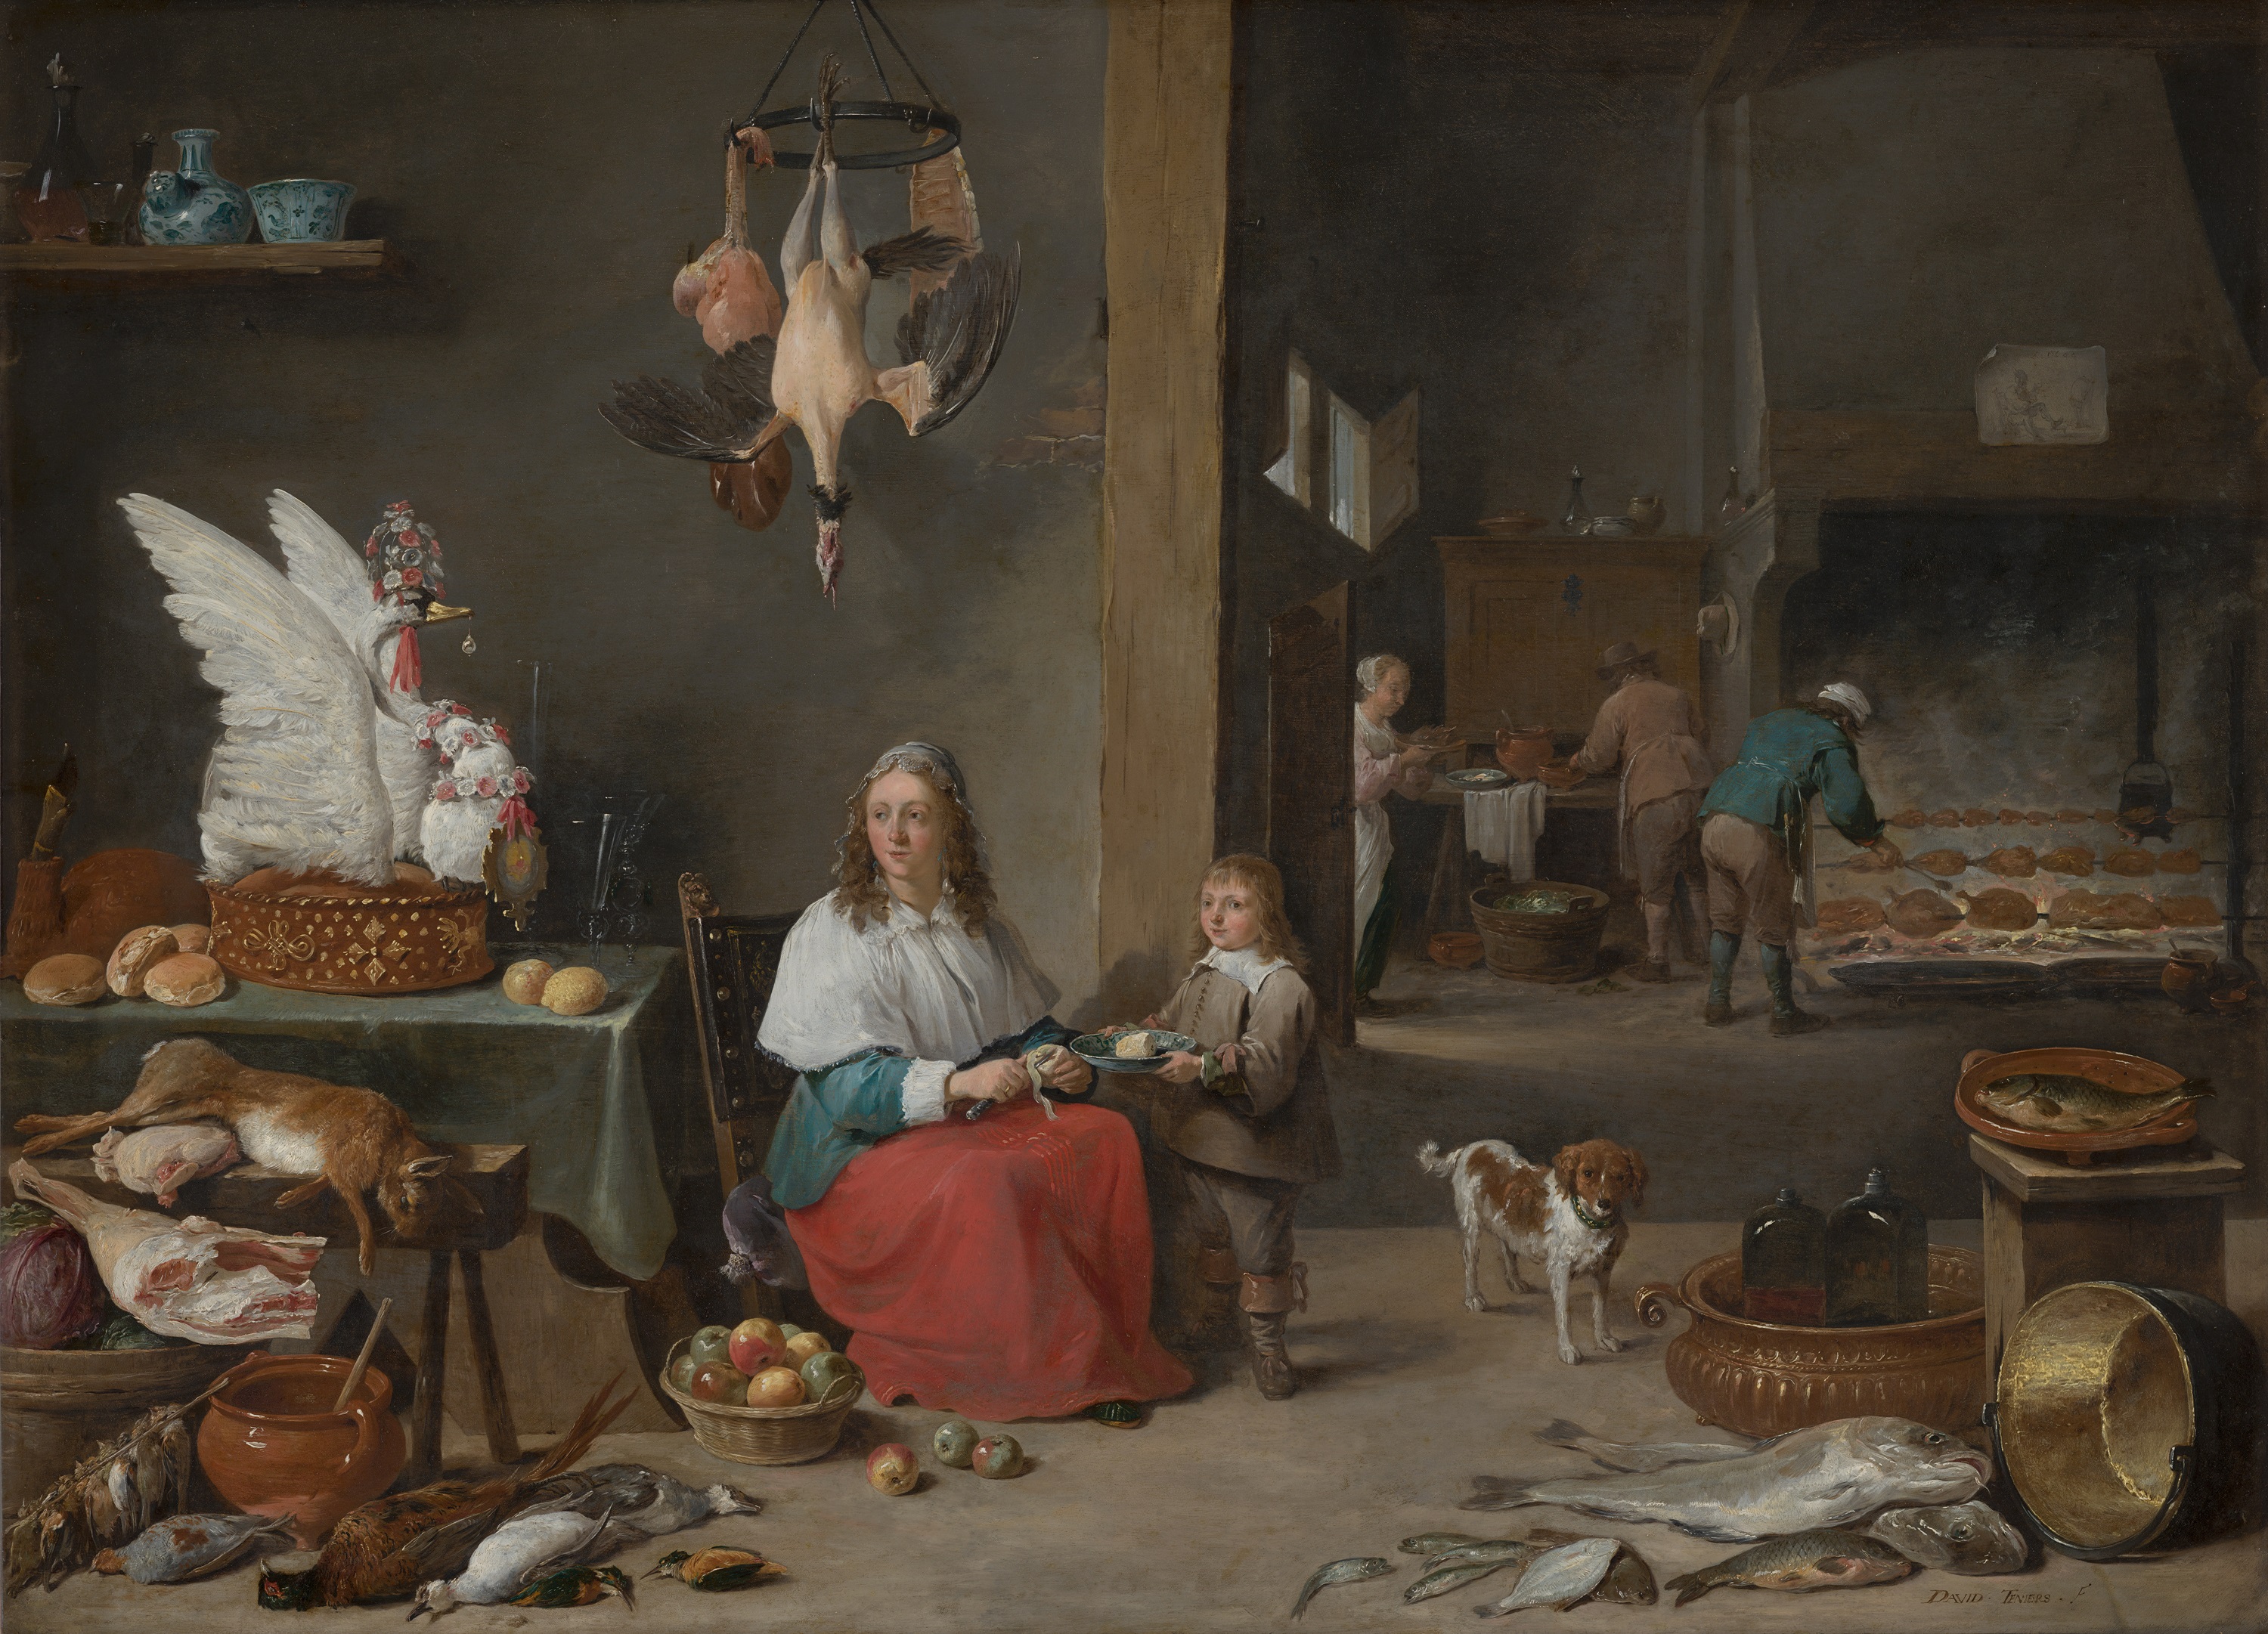 david-teniers-the-younger-kitchen-interior-1644-oil-on-copper-on-panel-57-x-77-8-cm-mauritshuis-the-hague-inv-no-260